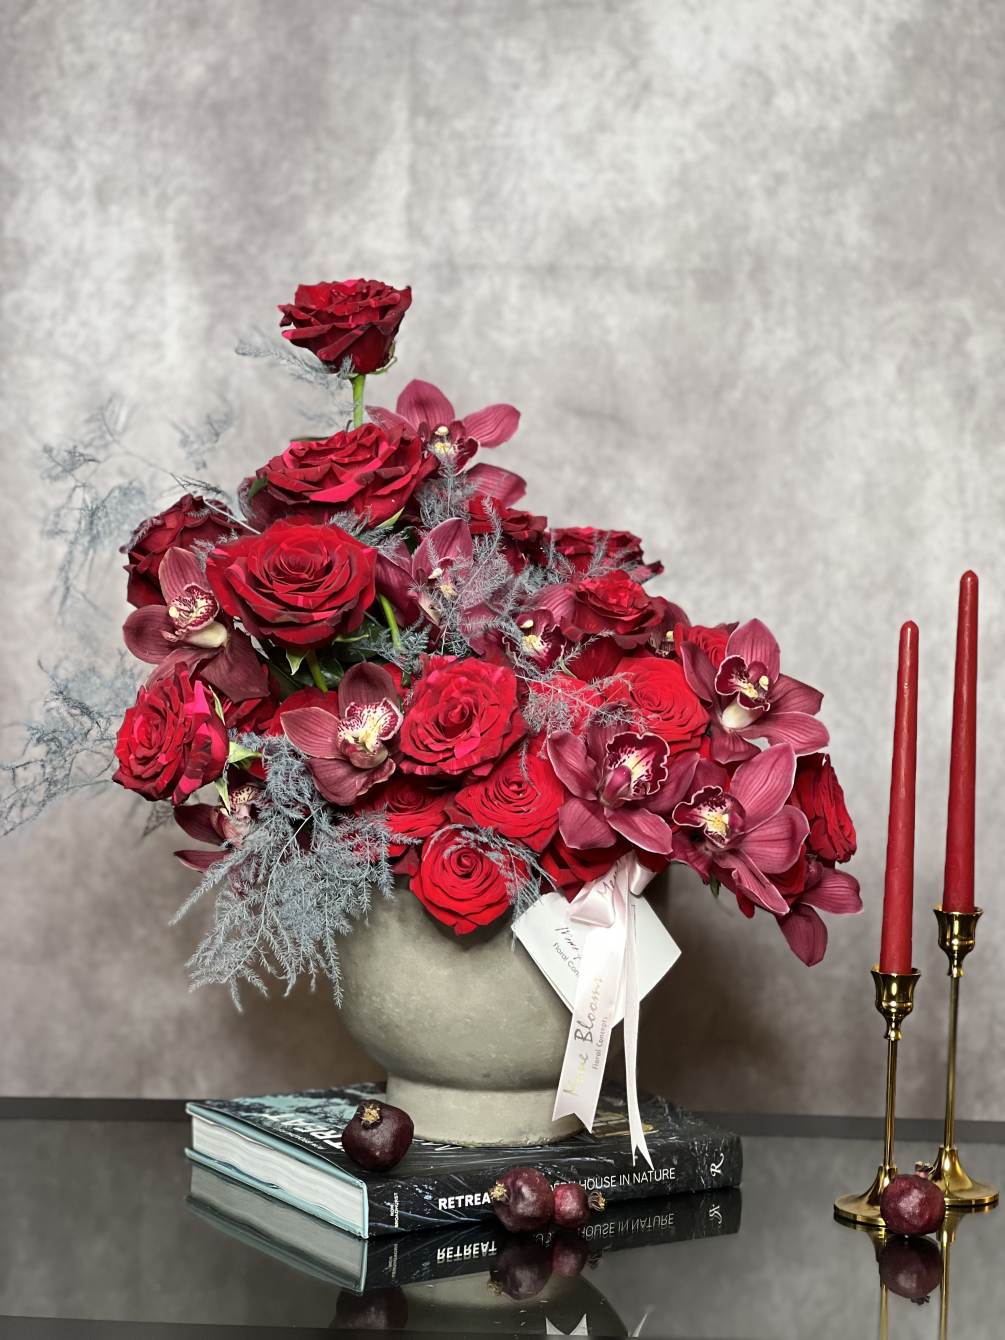 The unique design of mixed red roses and burgundy cymbidium orchids in